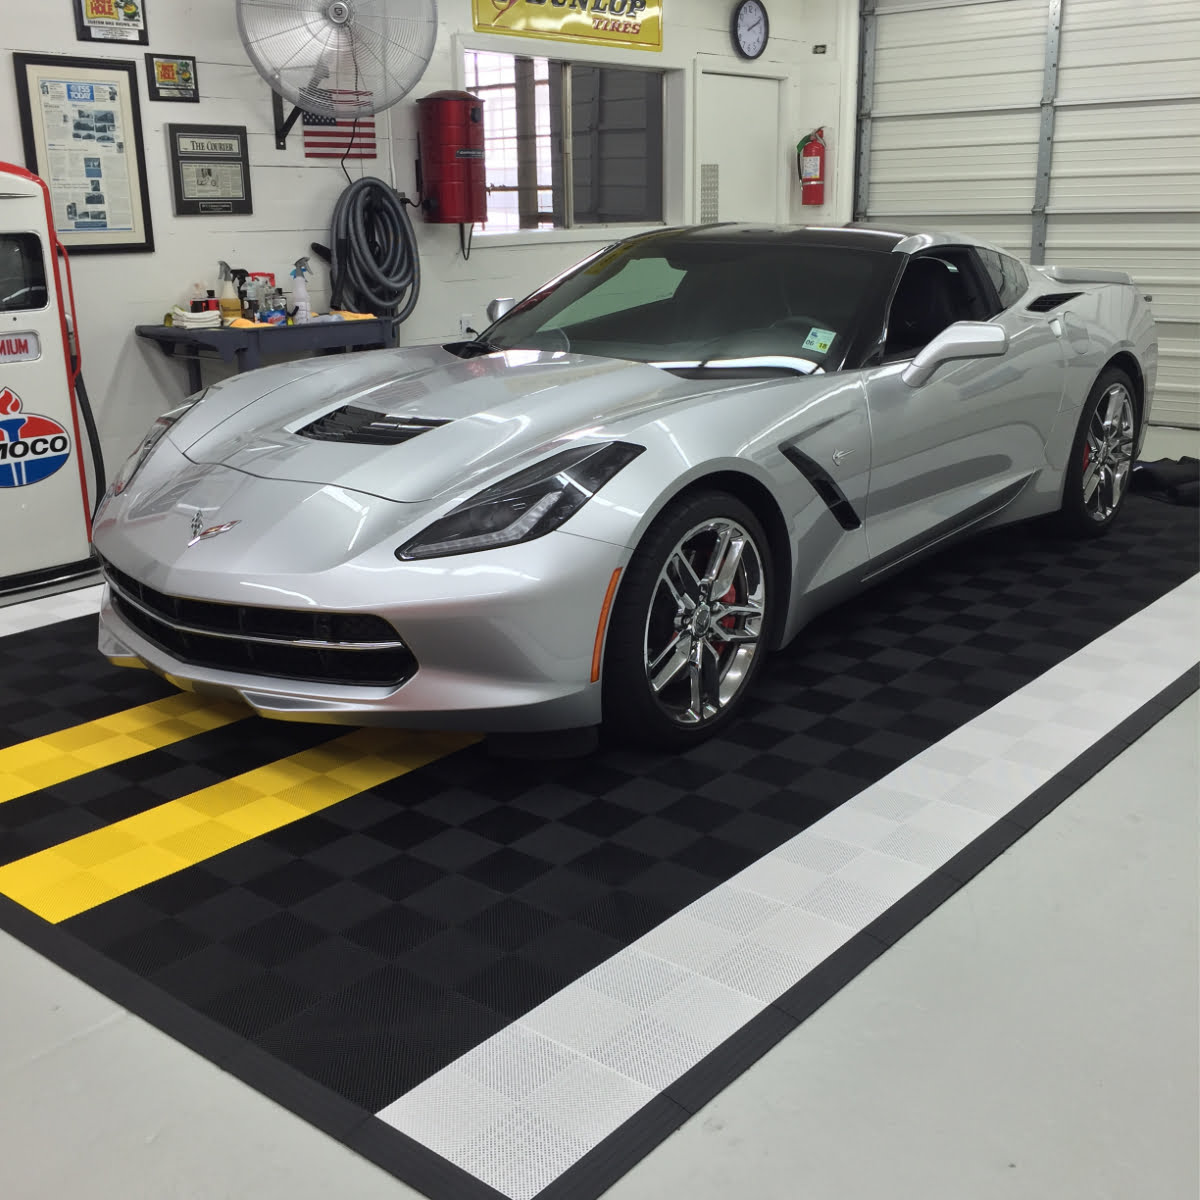 Corvette on a mat with our interlocking Perforated black, white and yellow tiles.